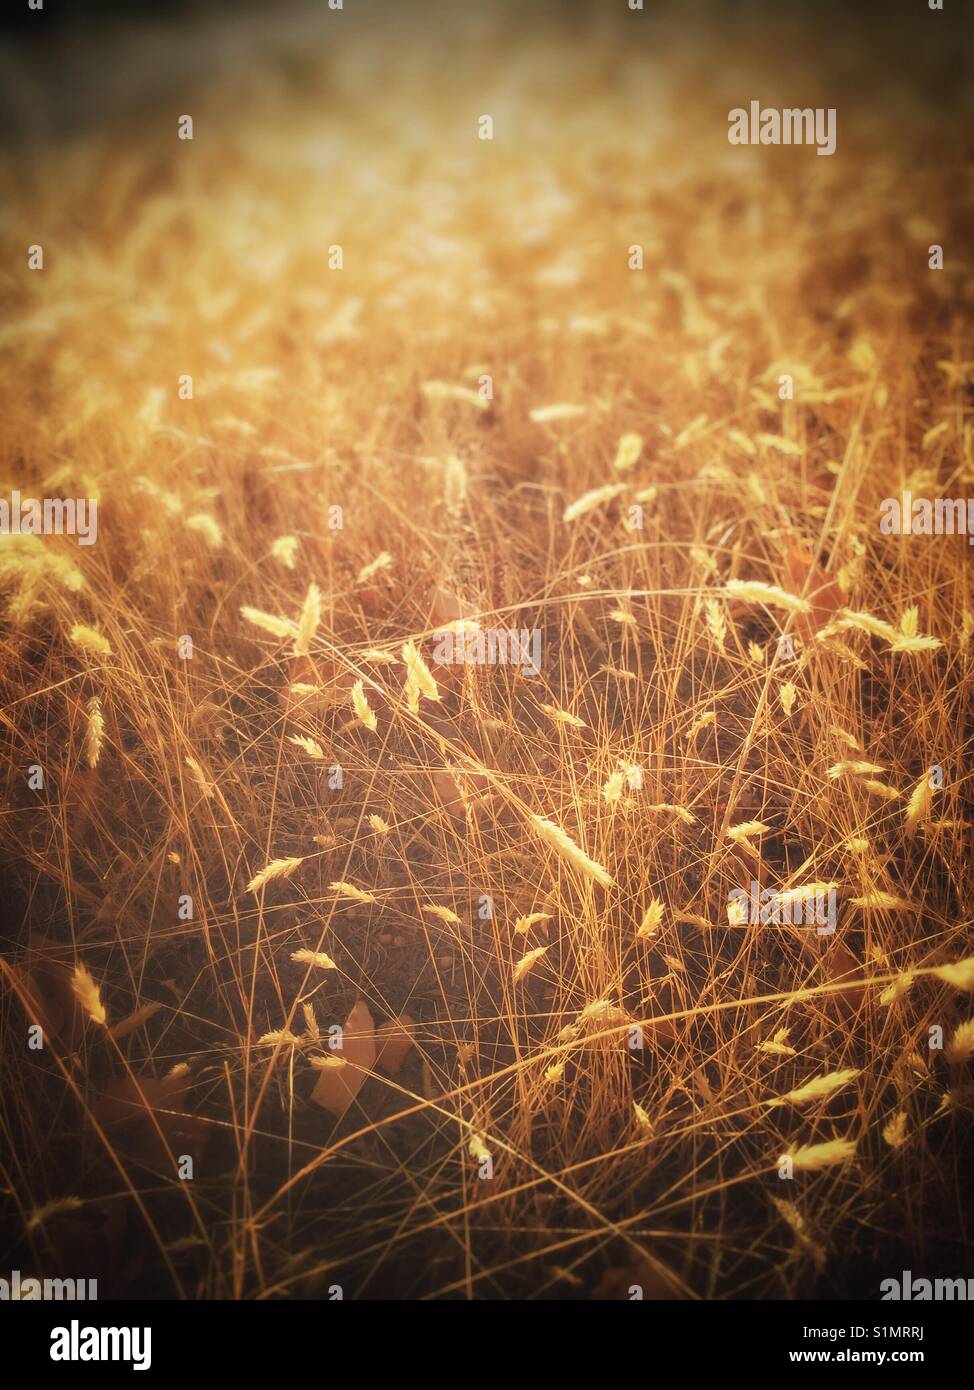 Golden grasses backlit by a setting summertime sun, British Columbia, Canada. Stock Photo